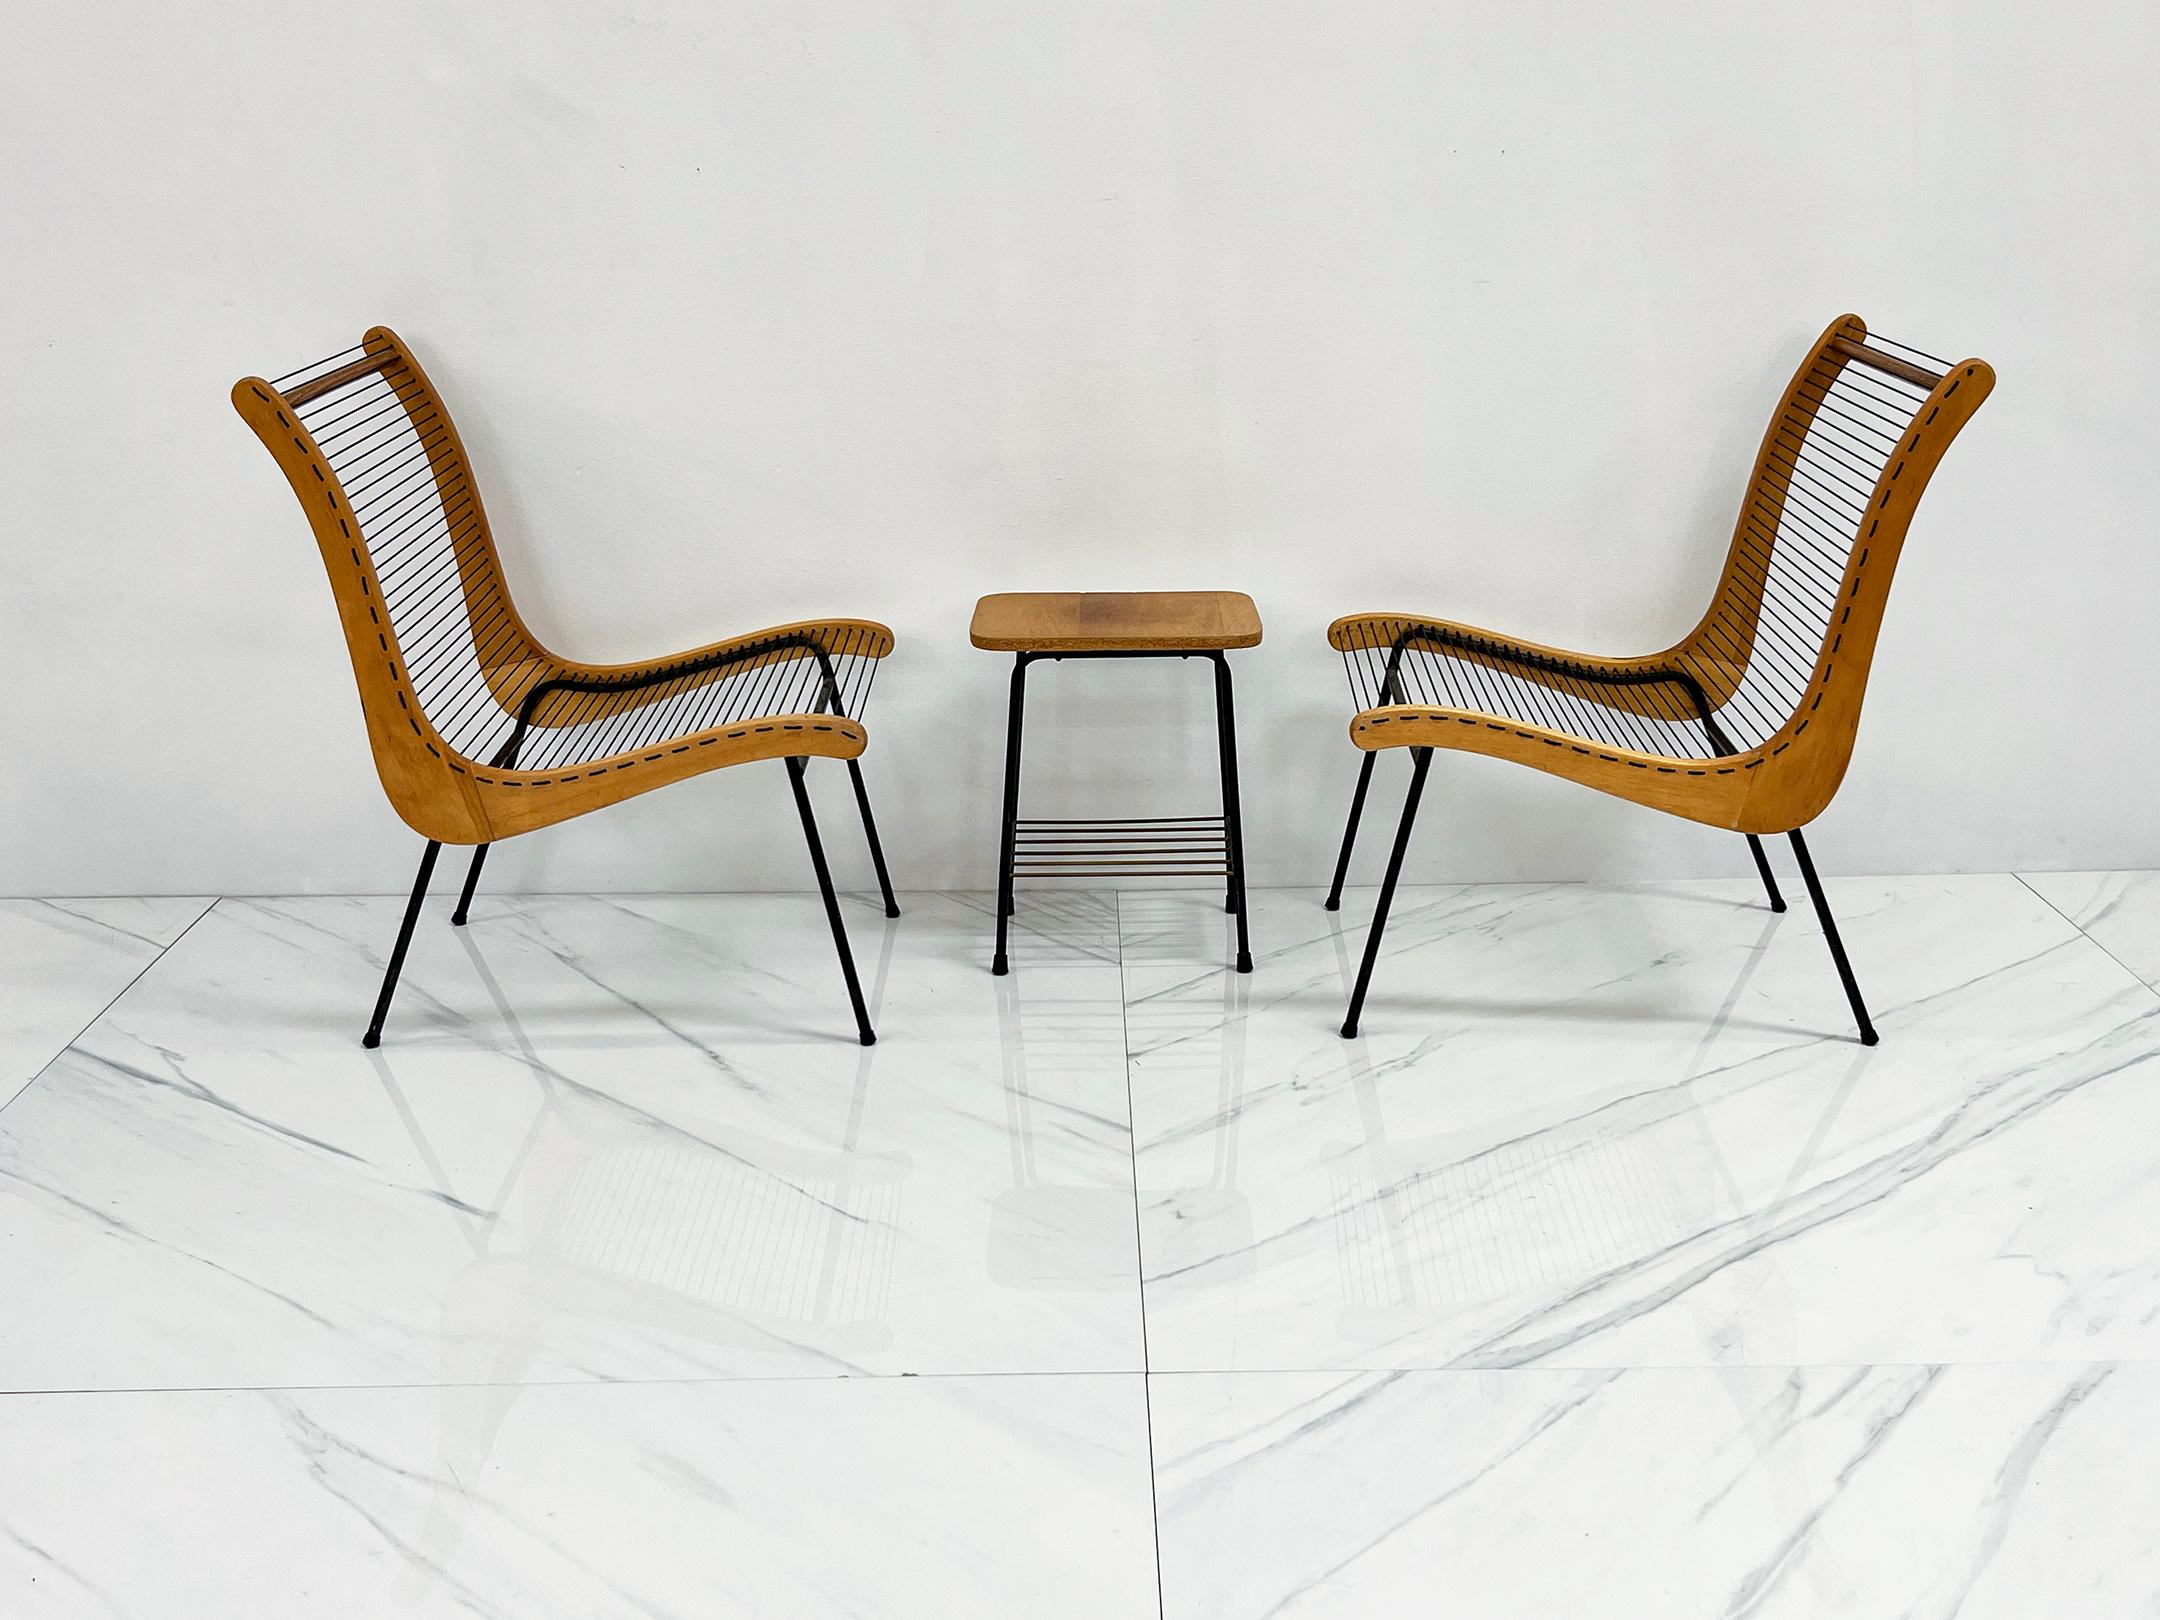 American String Chairs With Matching Table by Carl Koch, Vermont Tubbs, 1950's For Sale